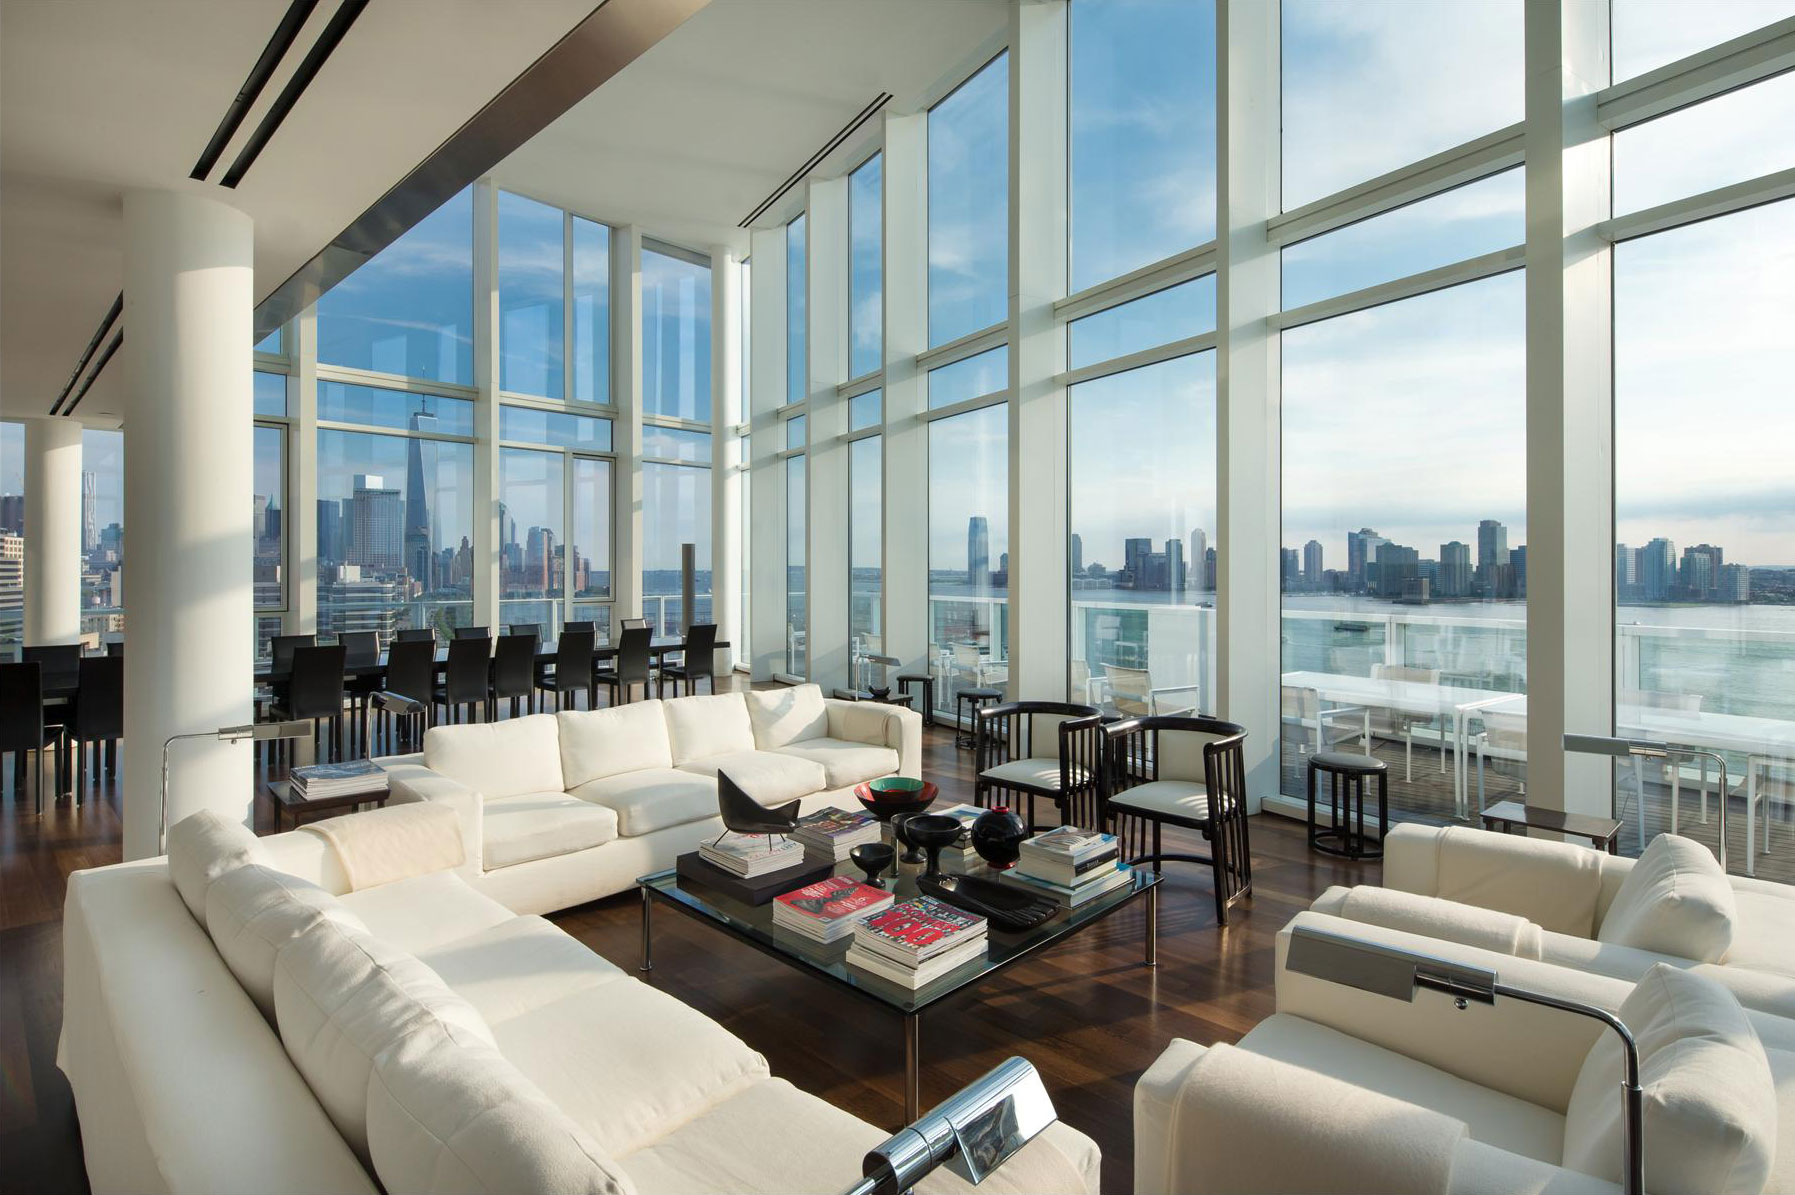 Luxurious Apartment Overlooking the Hudson River in Manhattan